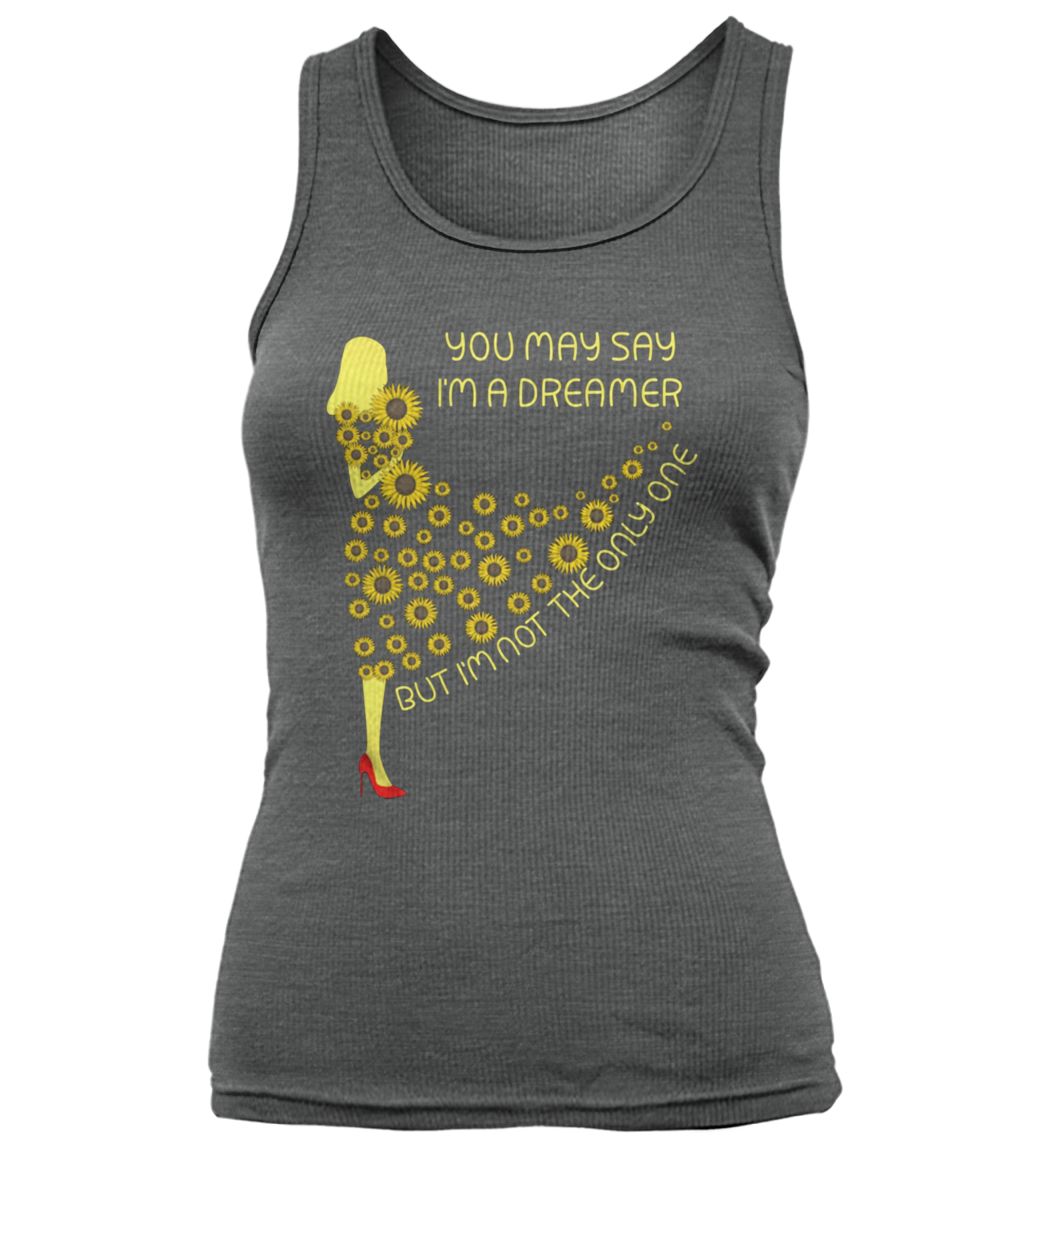 Sunflower dress you may say I'm a dreamer women's tank top